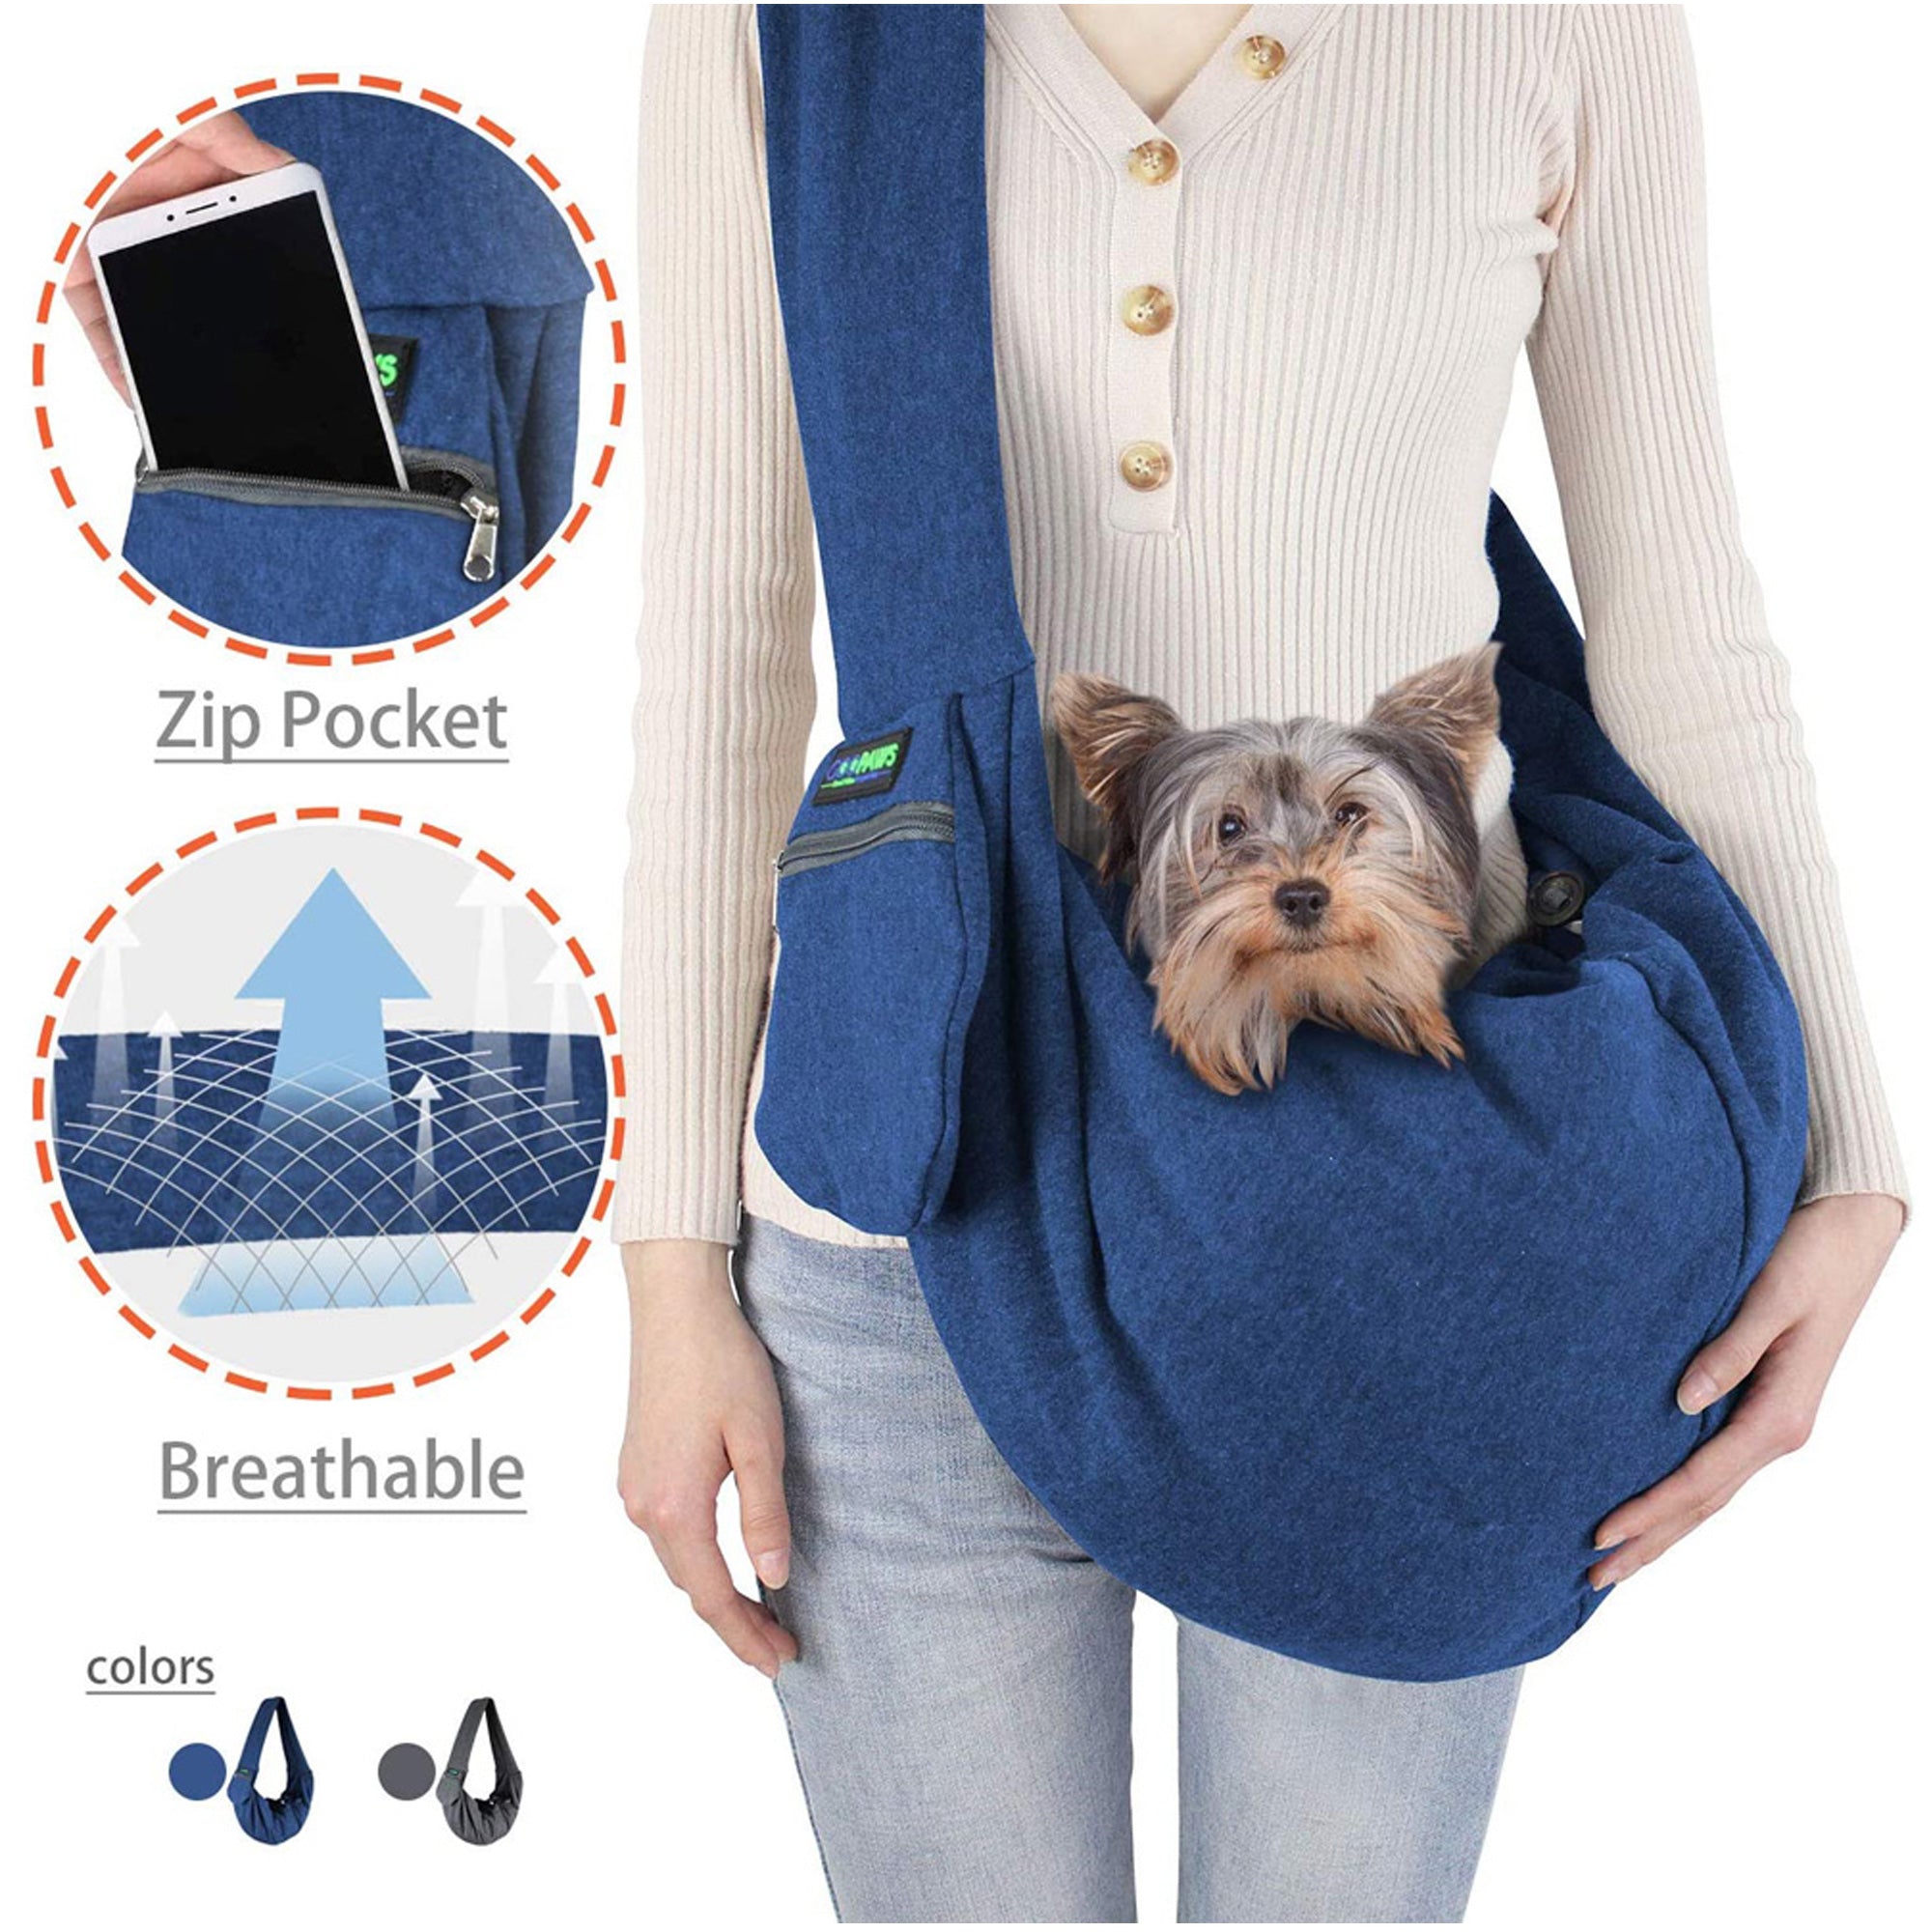 GOOPAWS Comfy Pet Sling for Small Dog Cat, Hand Free Bag, Navy Blue